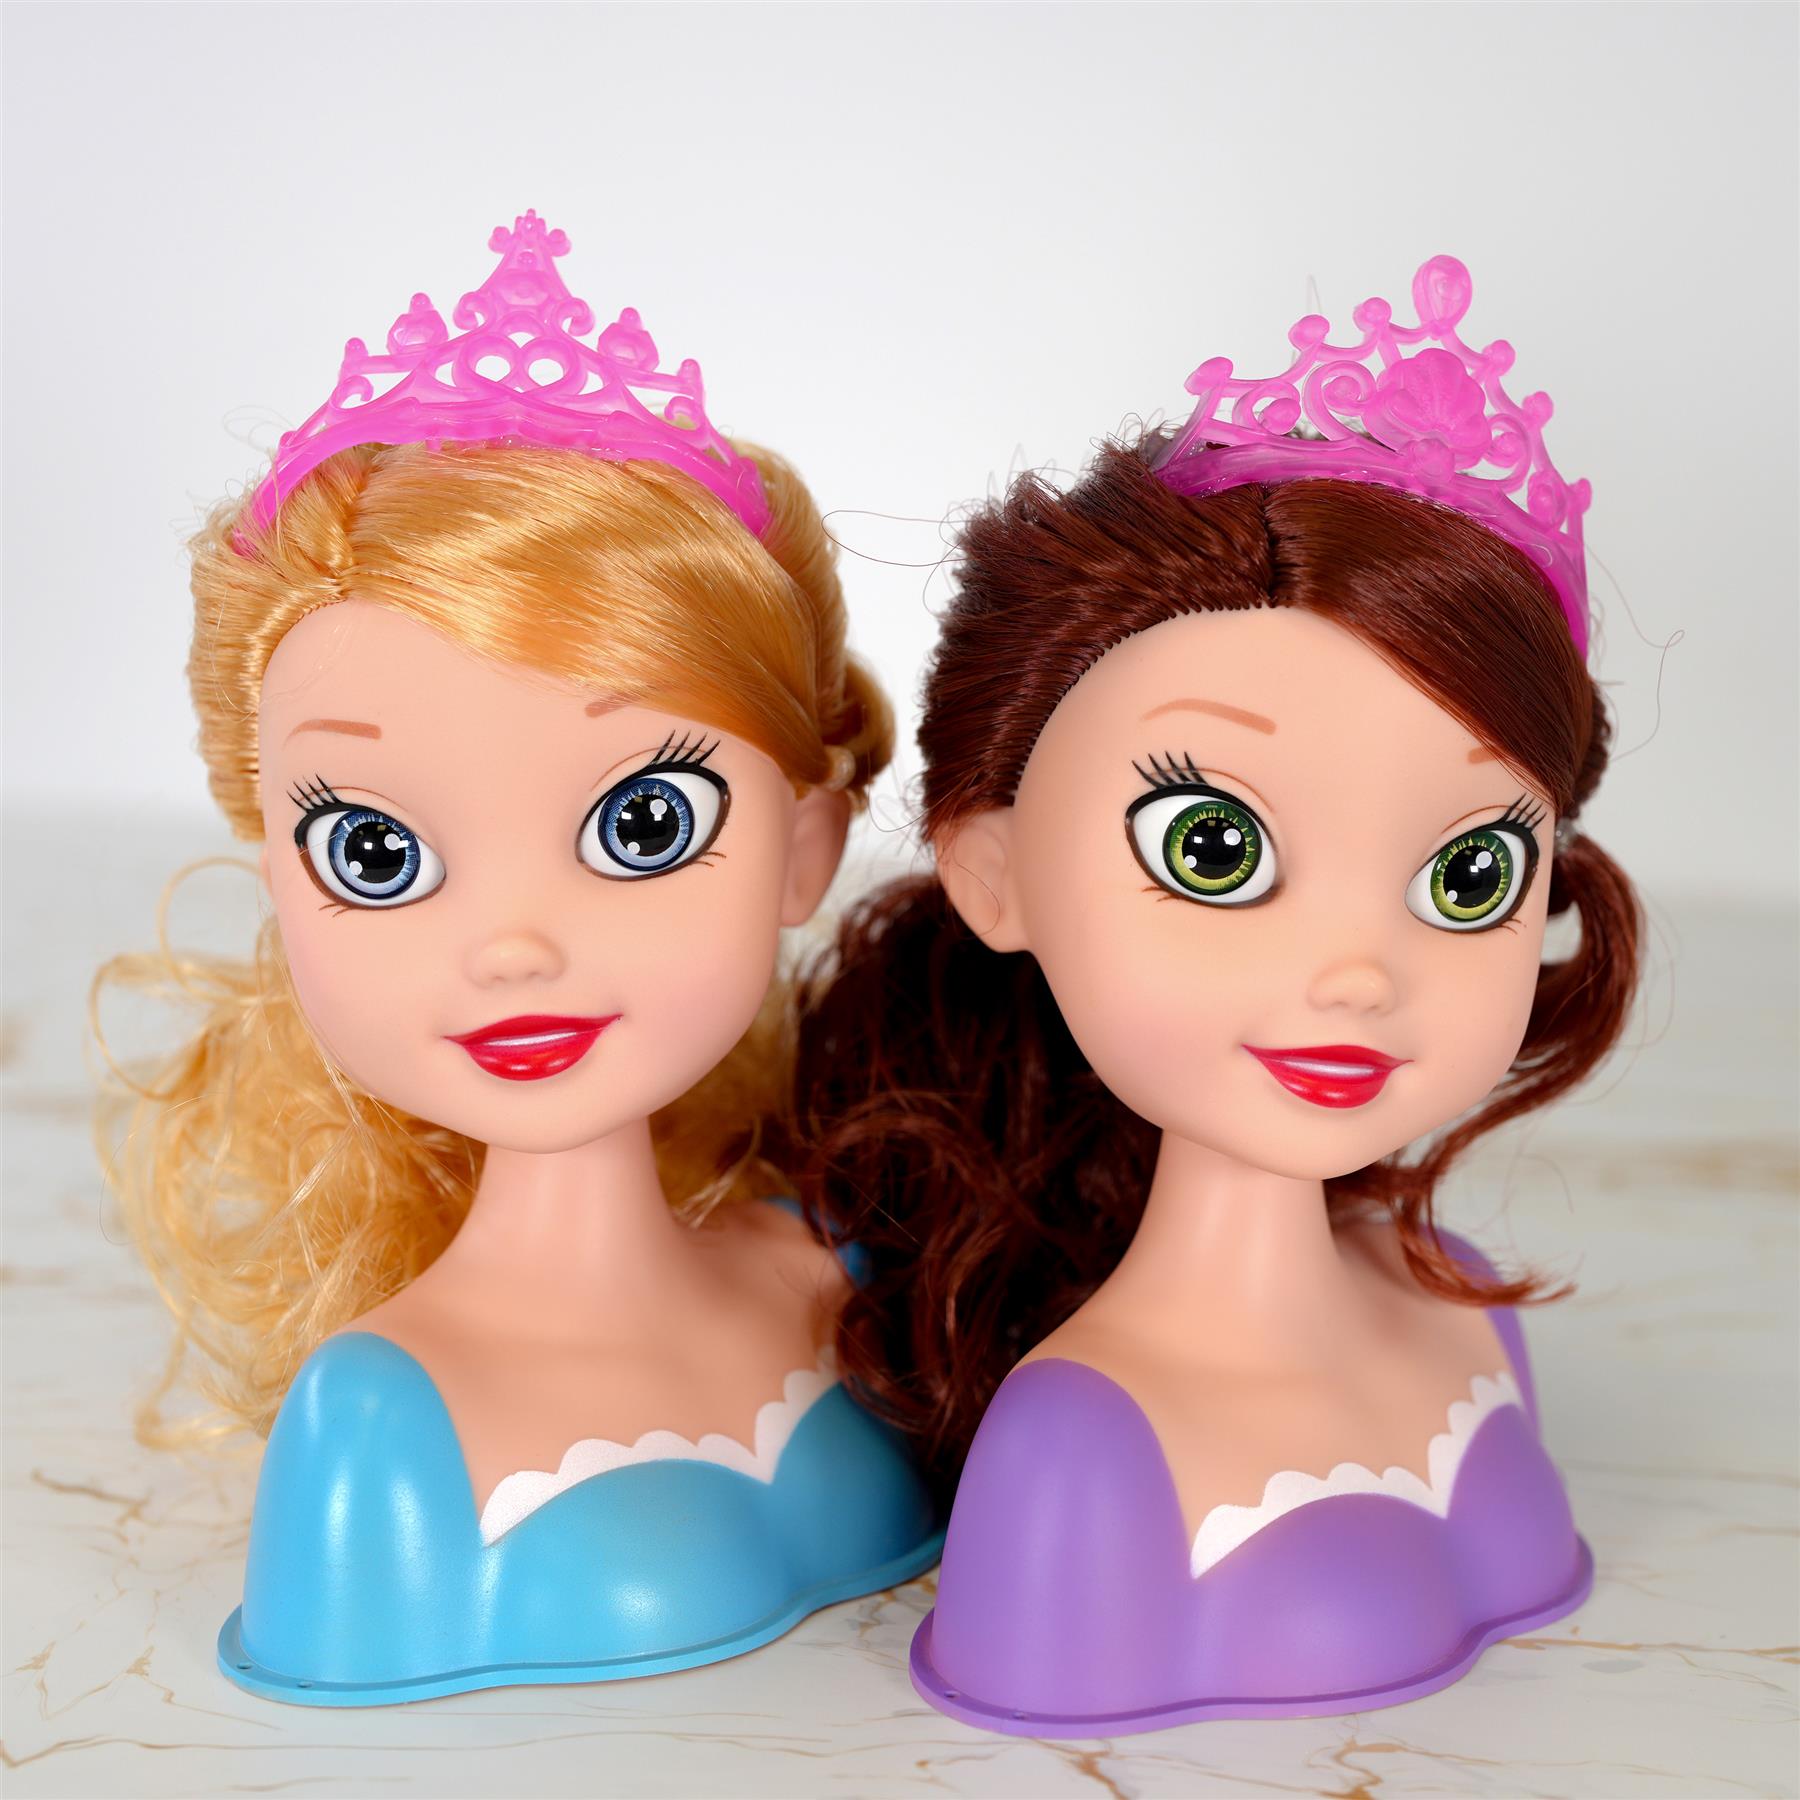 BiBi Doll toyfigure Princess Styling Head with Hair Accessories